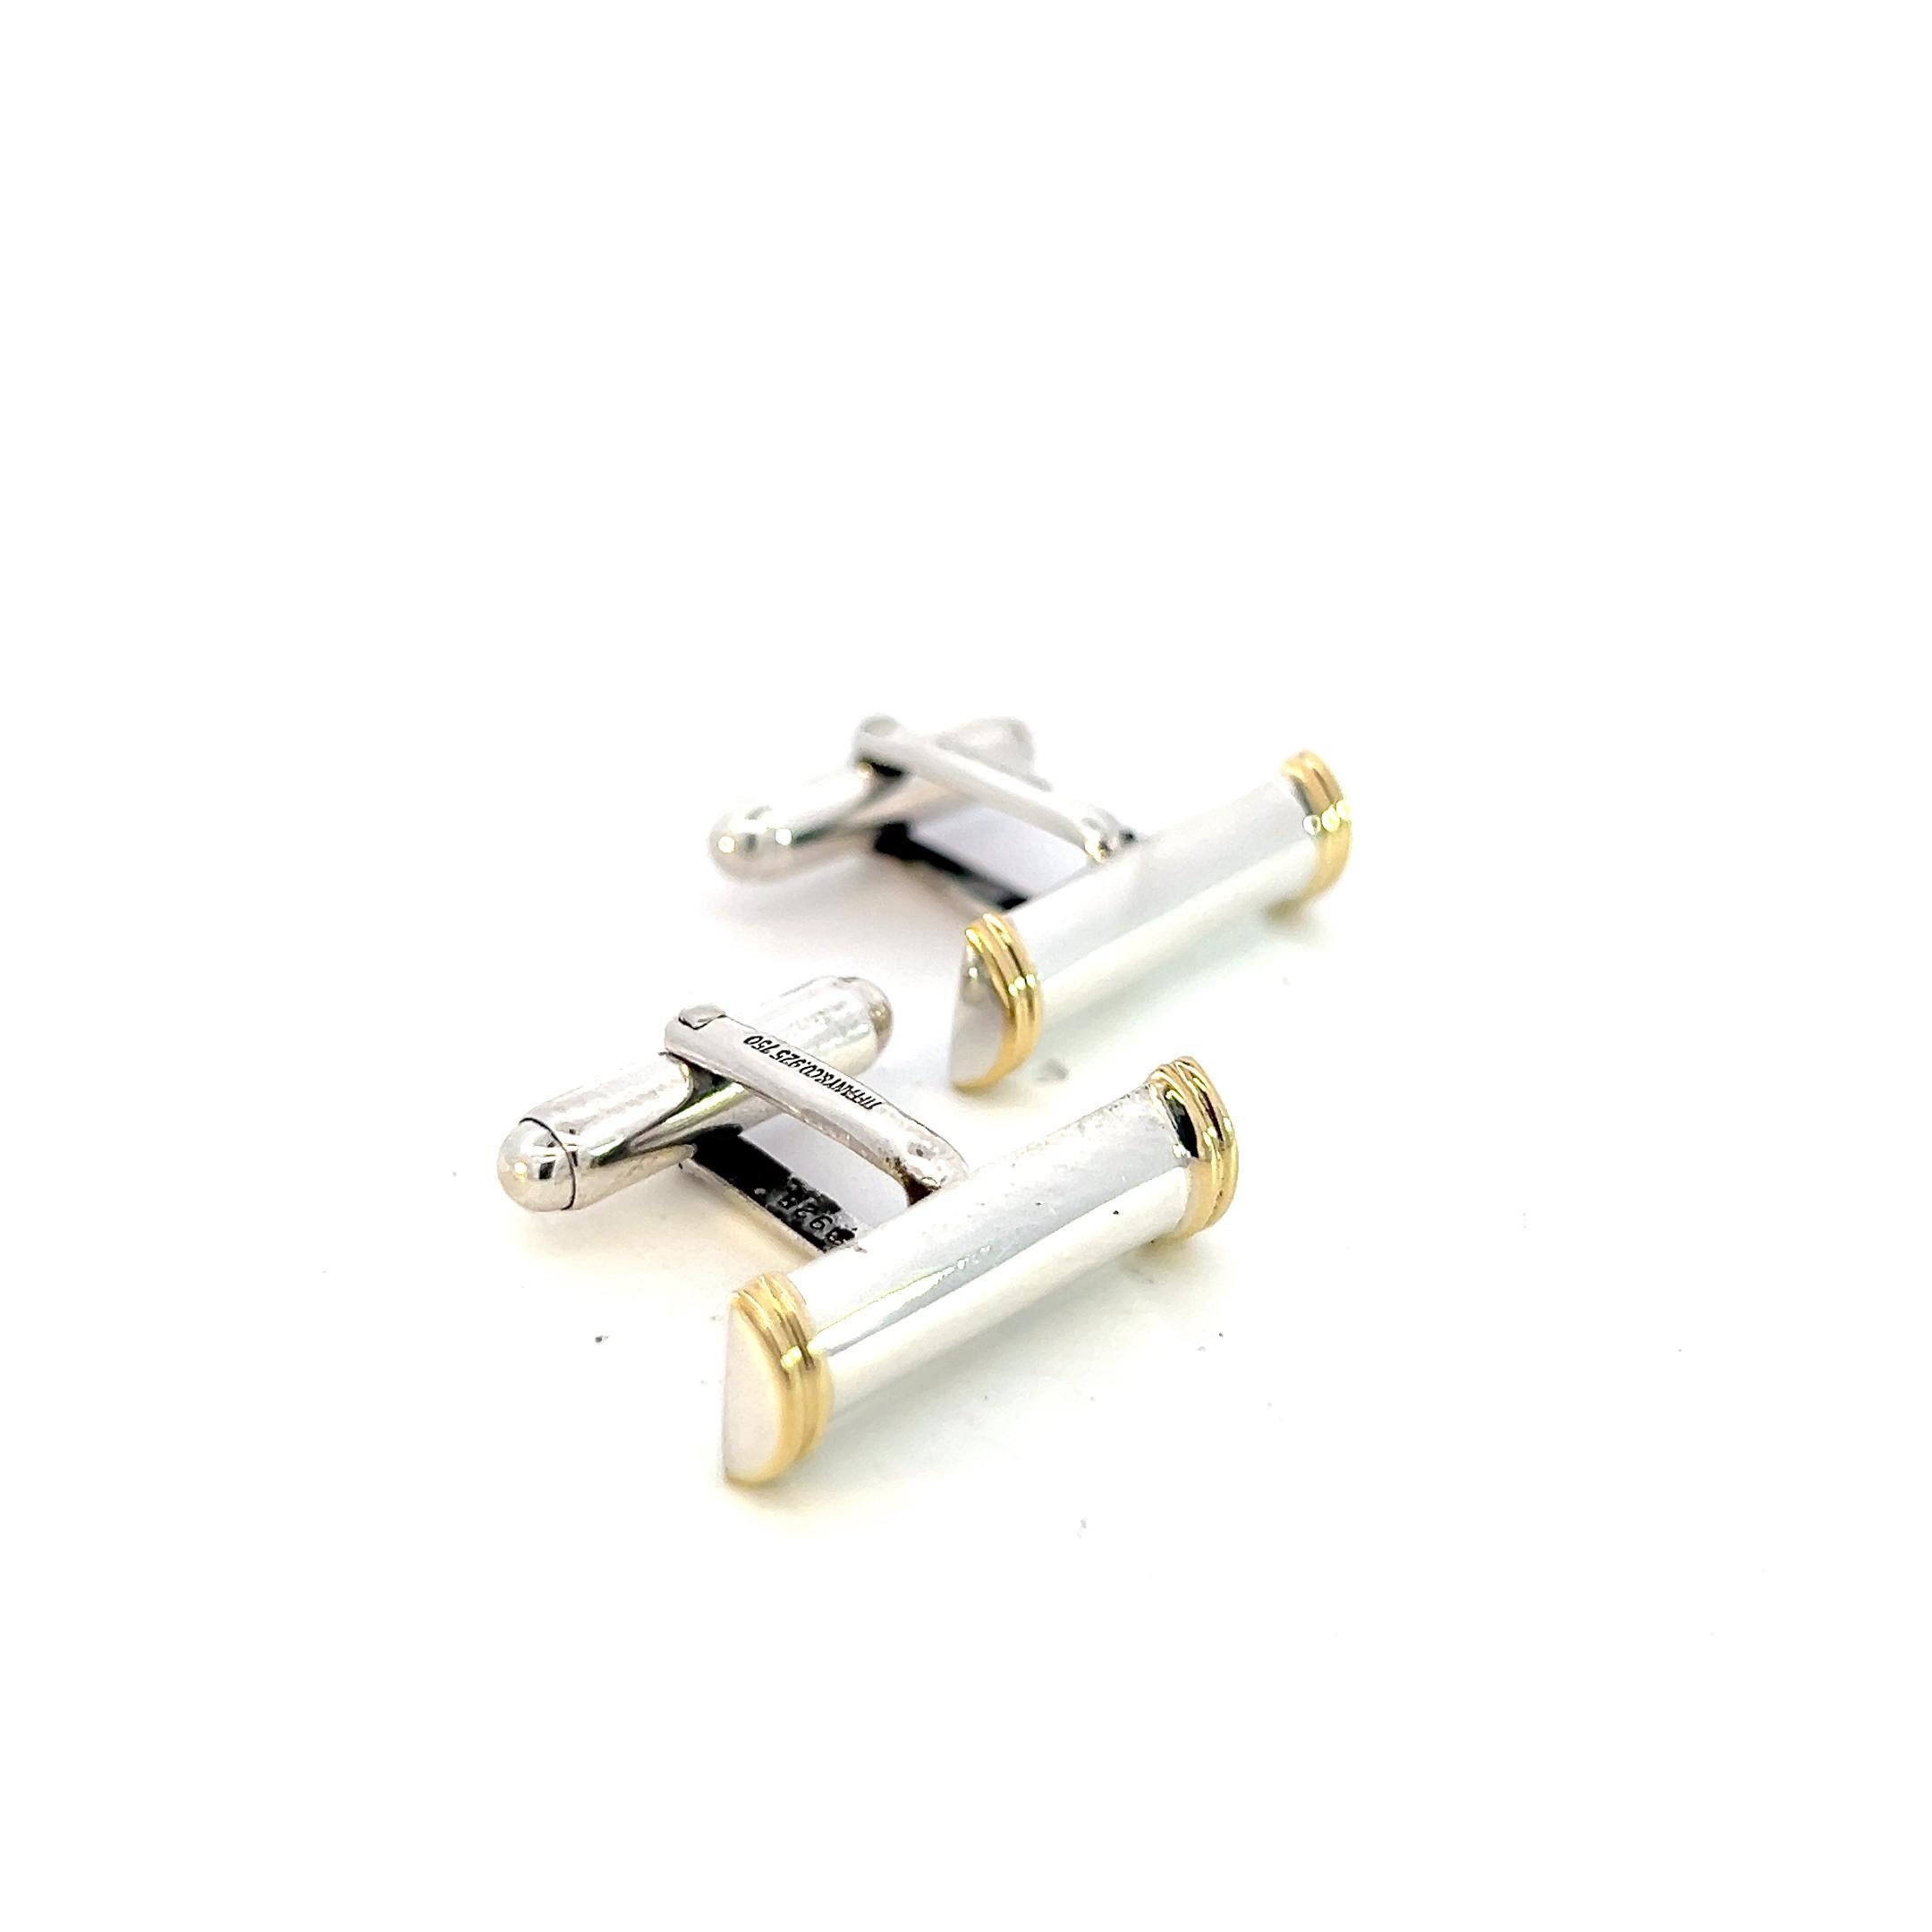 Authentic Tiffany & Co Estate Cufflinks 18k Gold and Sterling Silver TIF613

TRUSTED SELLER SINCE 2002

PLEASE SEE OUR HUNDREDS OF POSITIVE FEEDBACKS FROM OUR CLIENTS!!

FREE SHIPPING

DETAILS
Metal: Sterling Silver & 18k Yellow Gold
Weight: 10.34